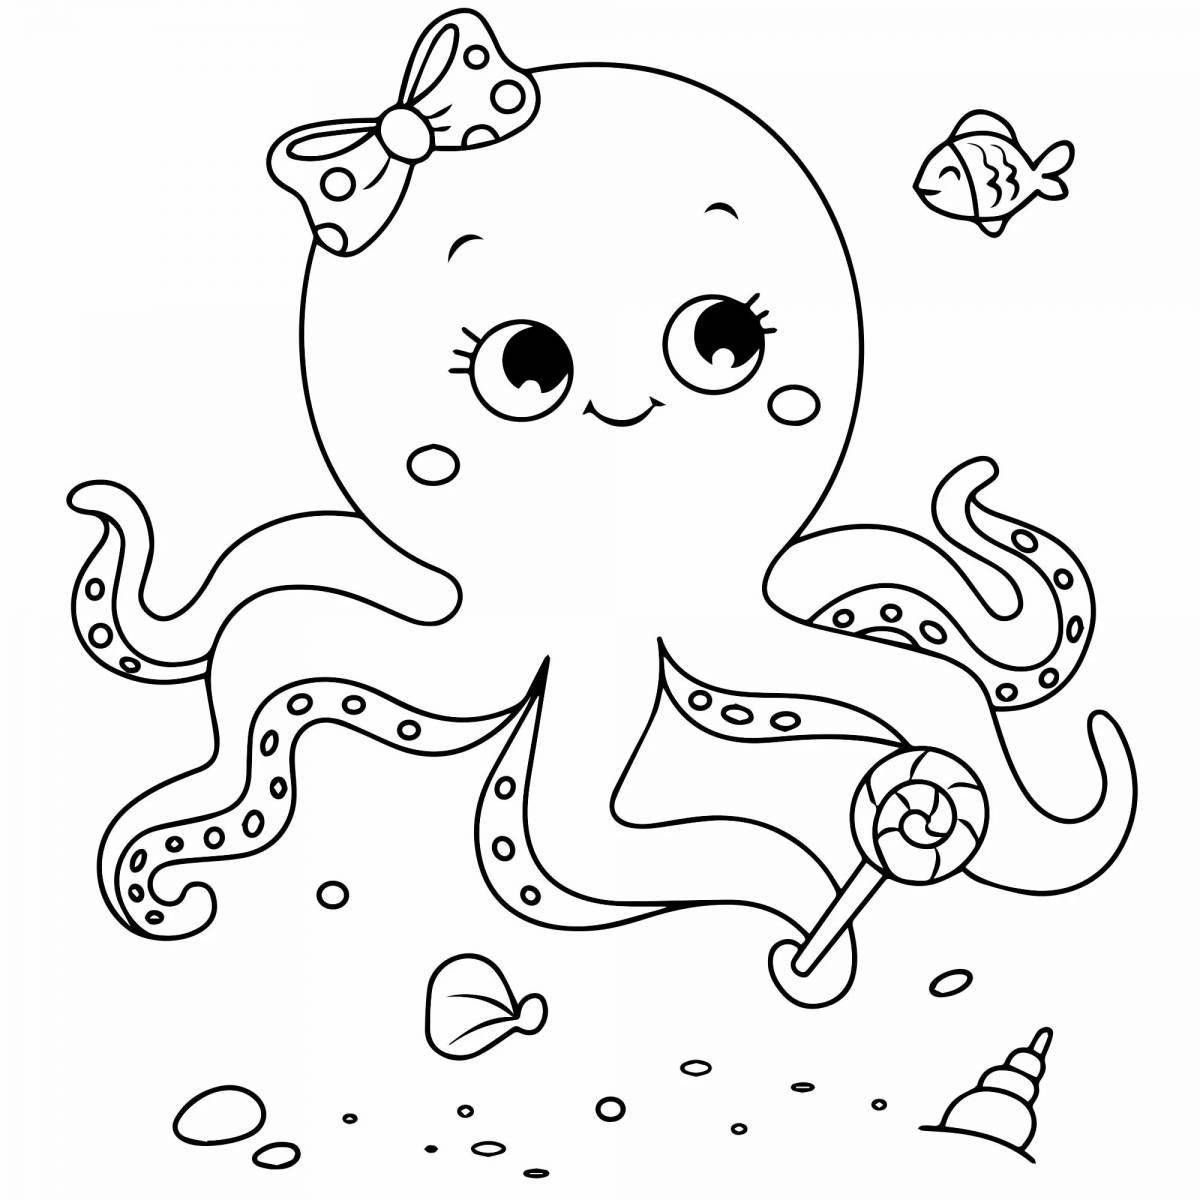 Playful marine life coloring page for 4-5 year olds